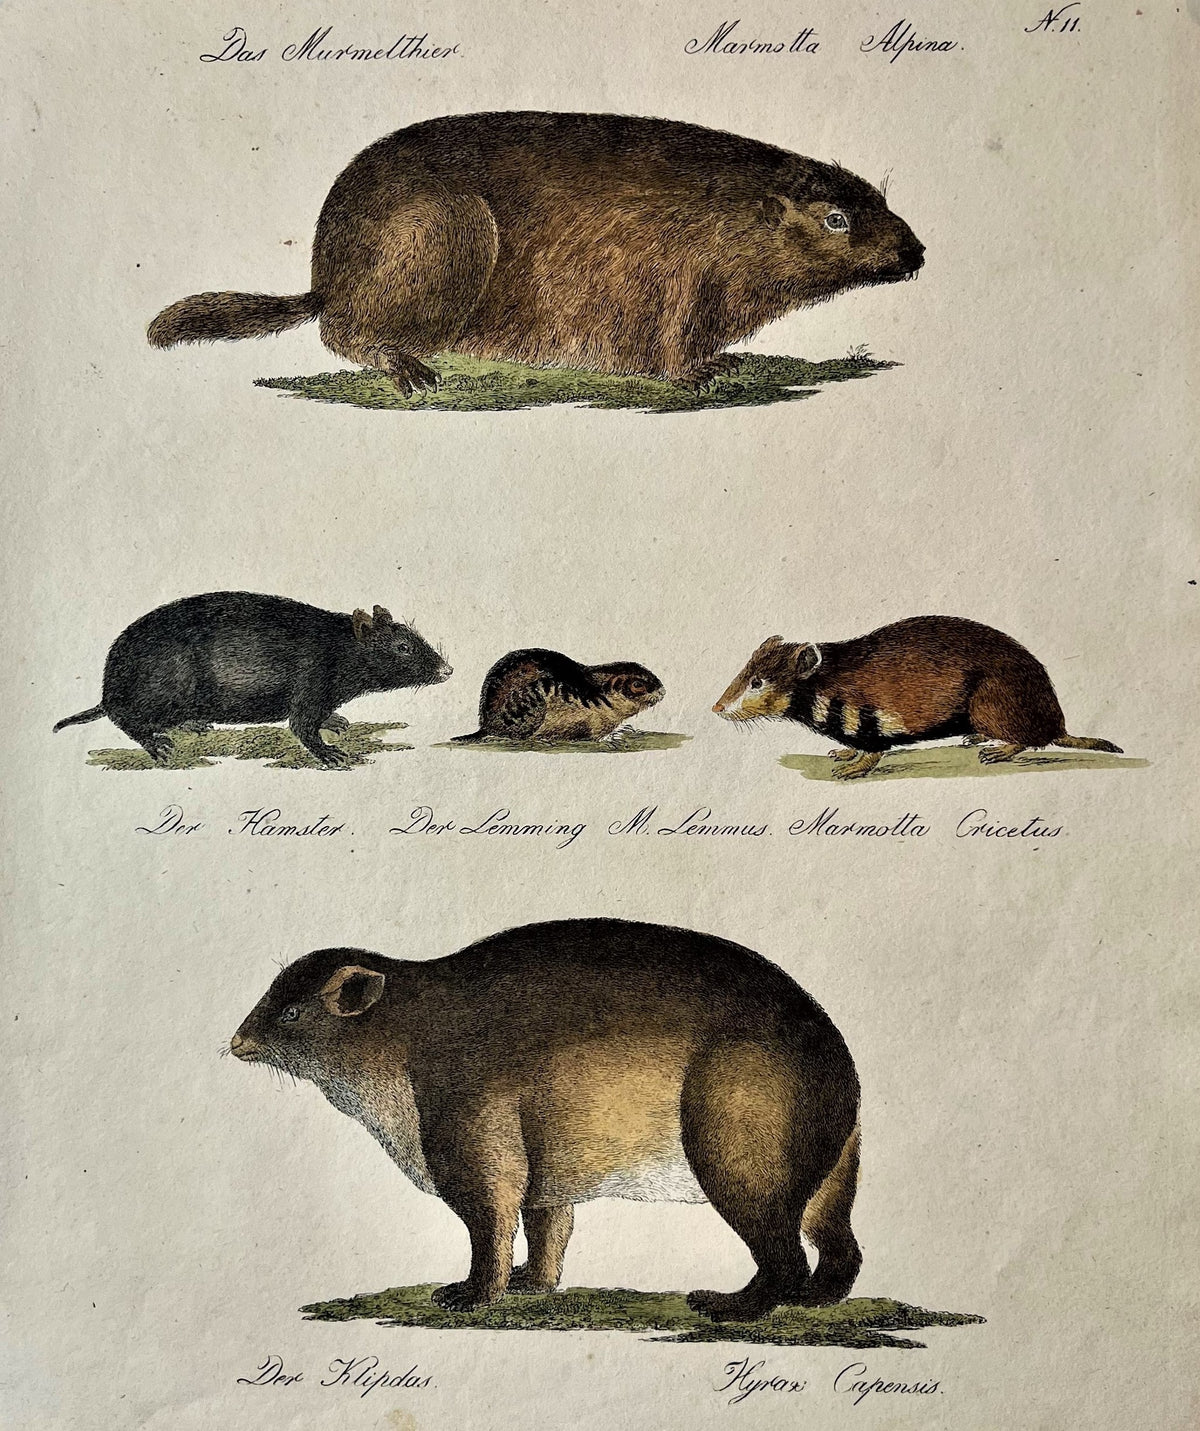 Brodtman Rodents- Hand Colored Engraving - Authentic Vintage Antique Print